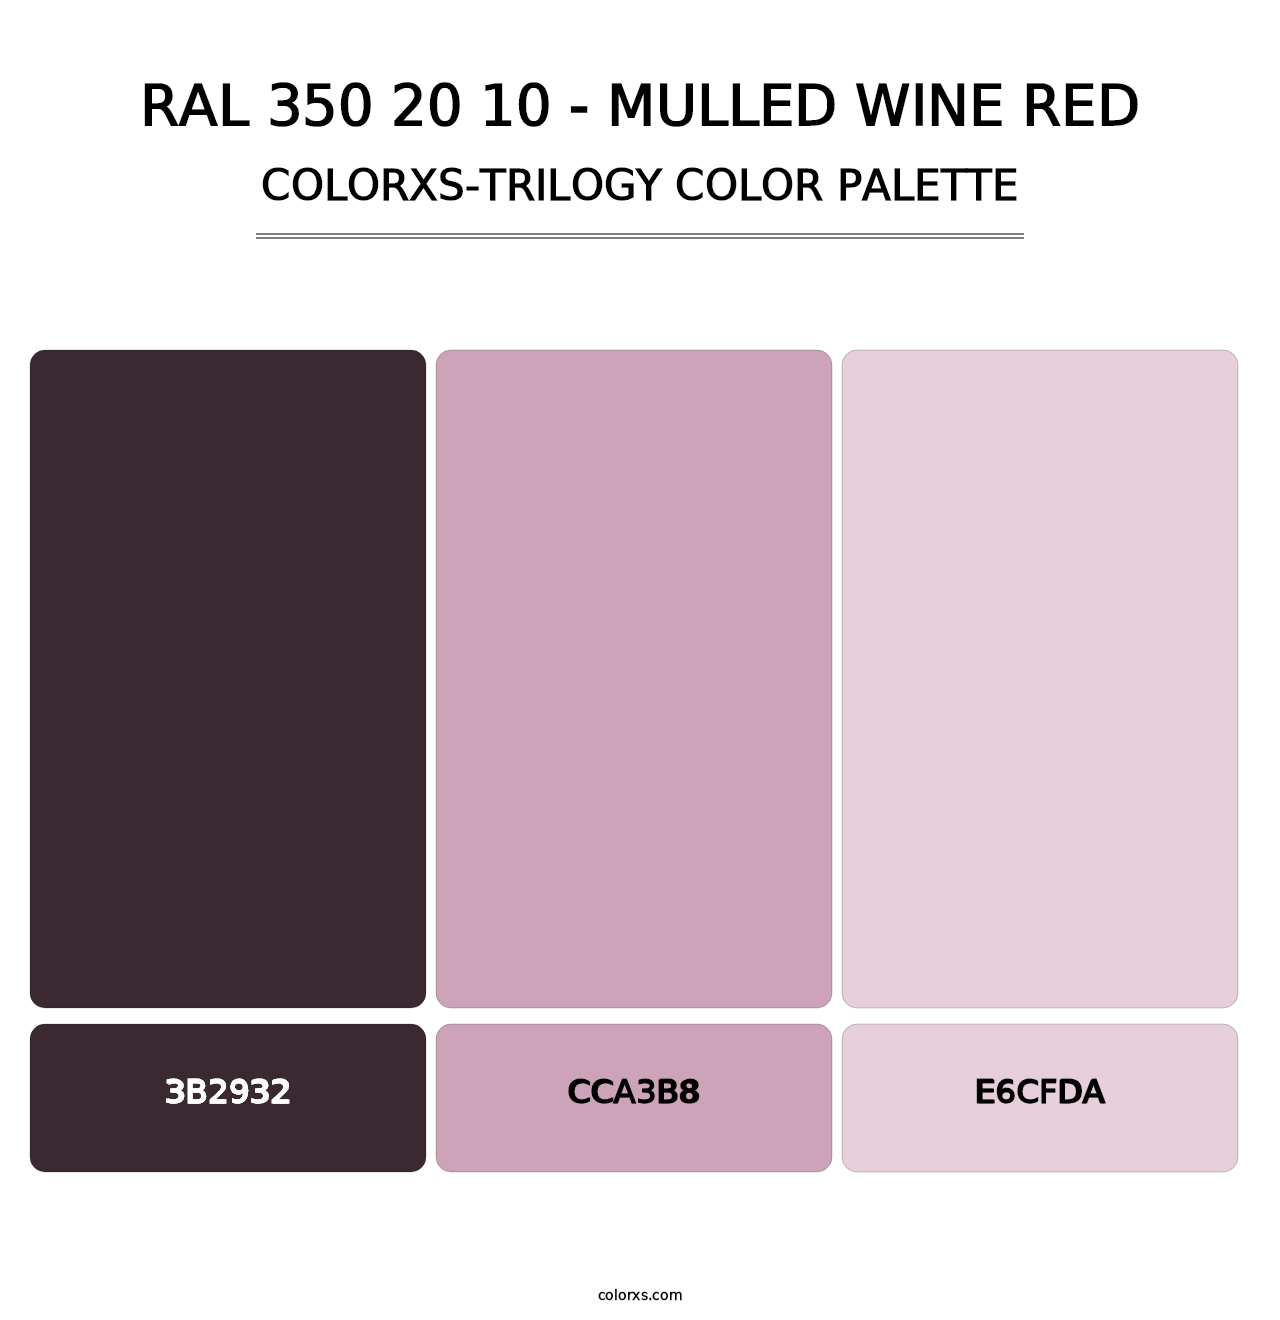 RAL 350 20 10 - Mulled Wine Red - Colorxs Trilogy Palette